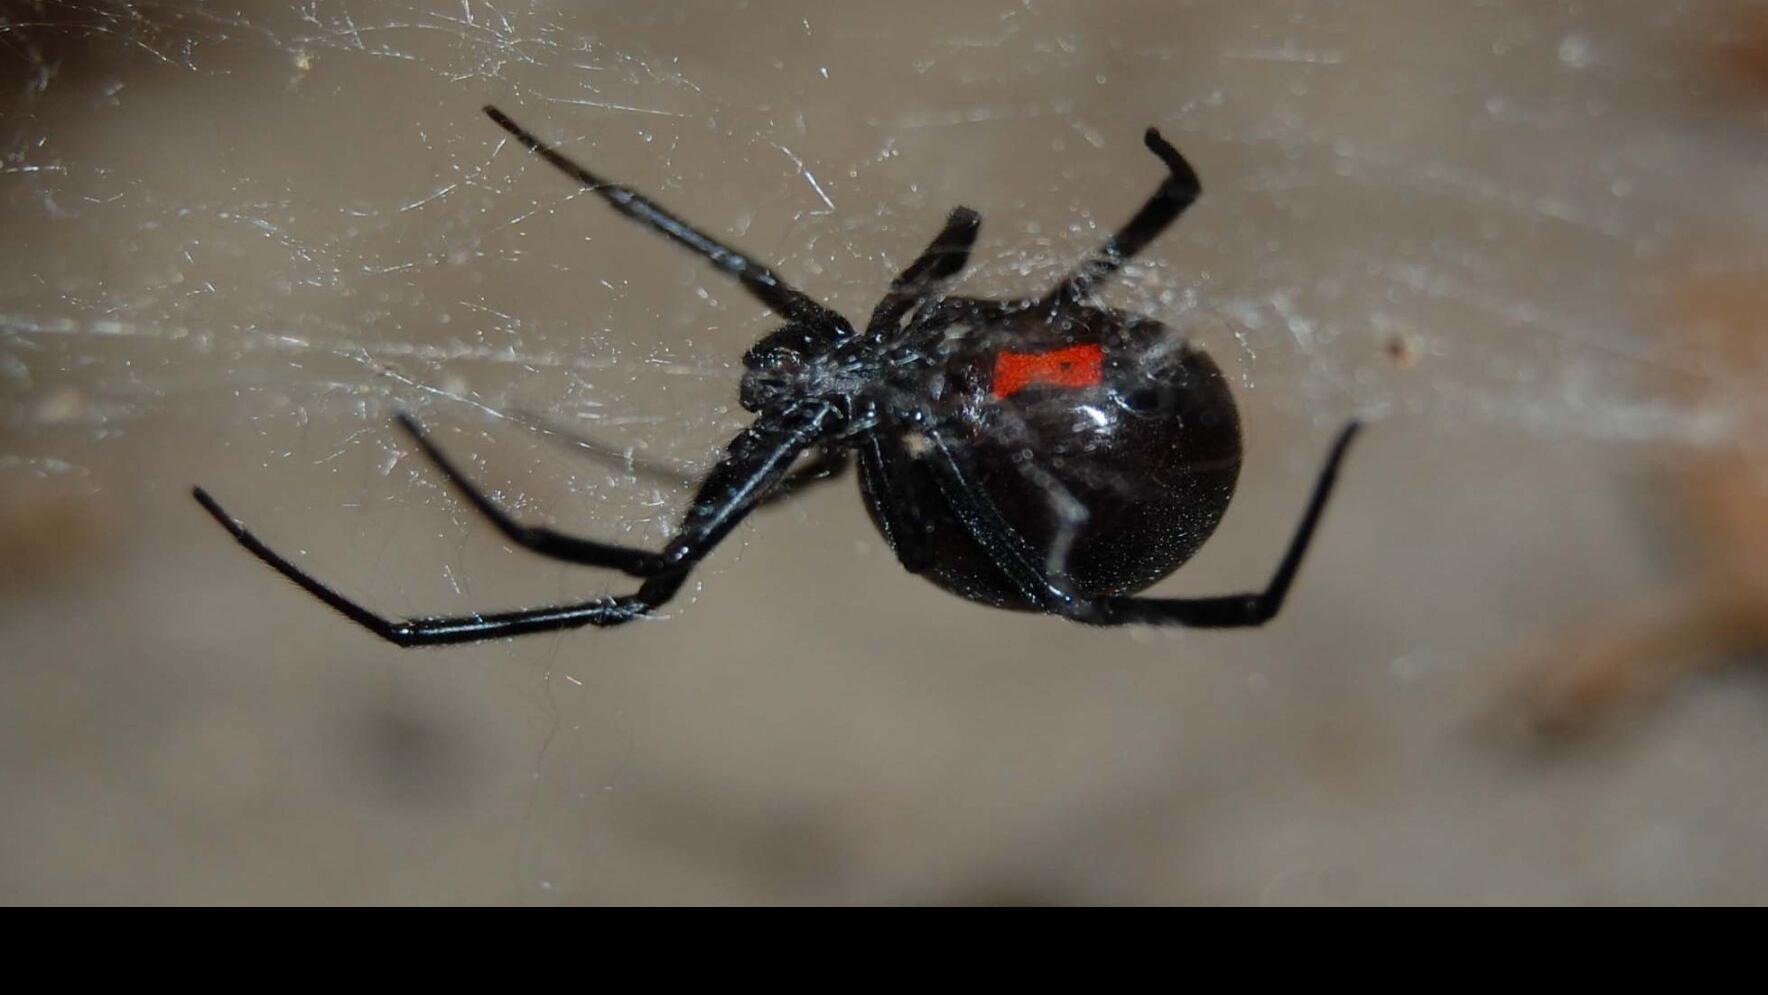 How do I get rid of Black Widow Spiders?